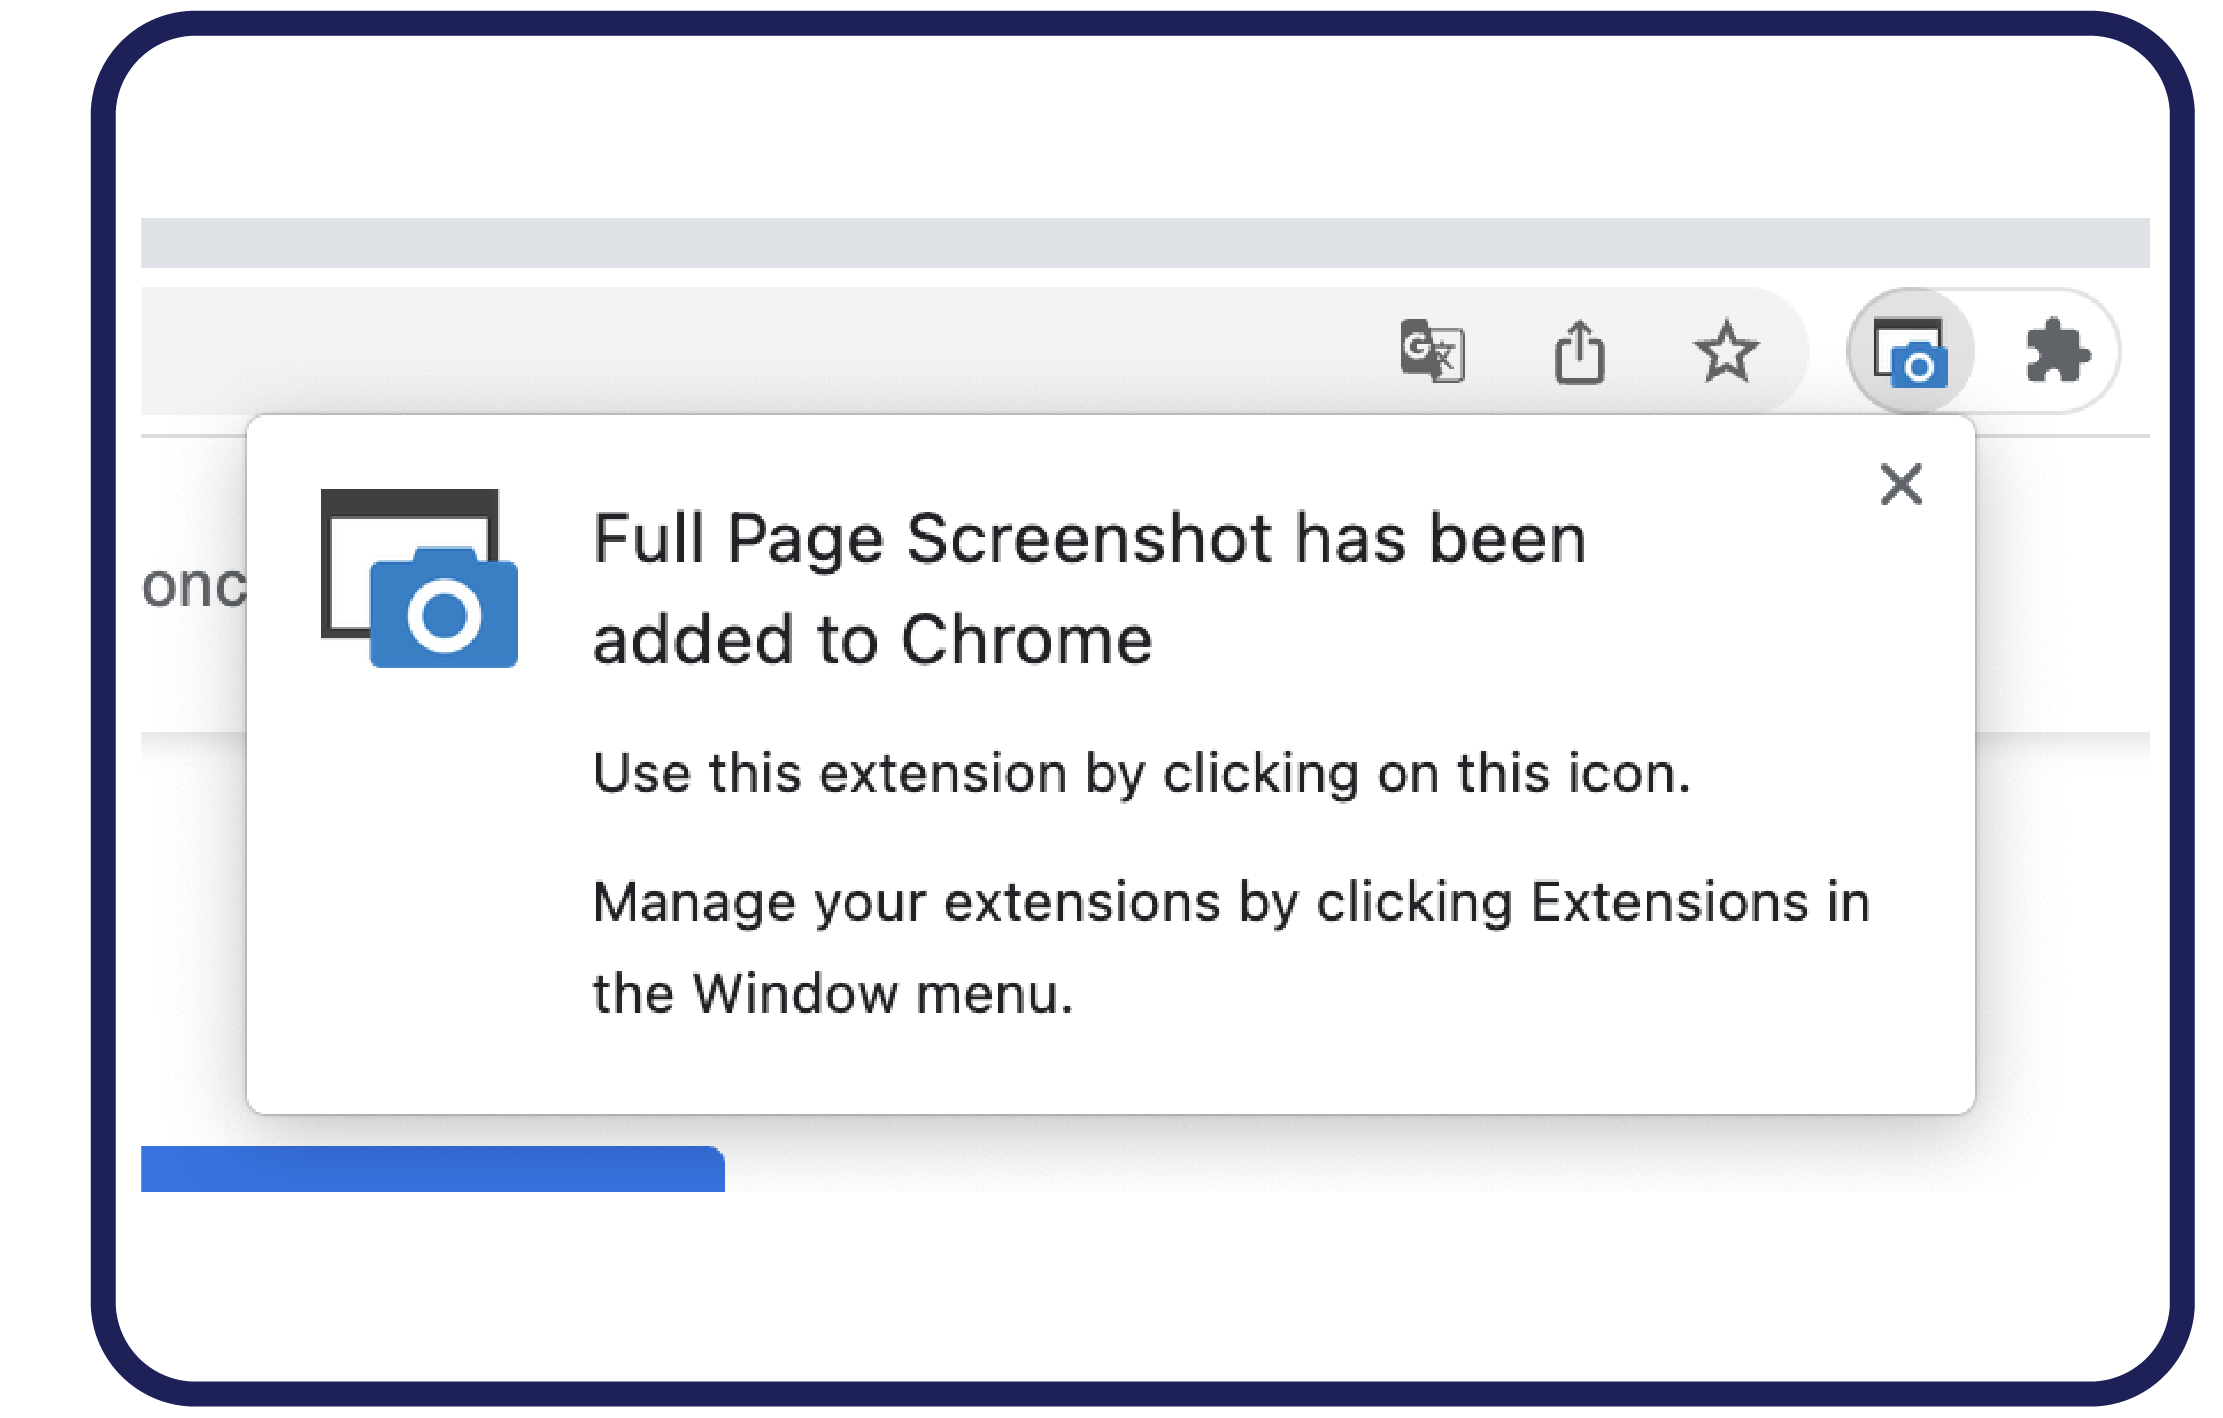 full page screenshot extension in google chrome